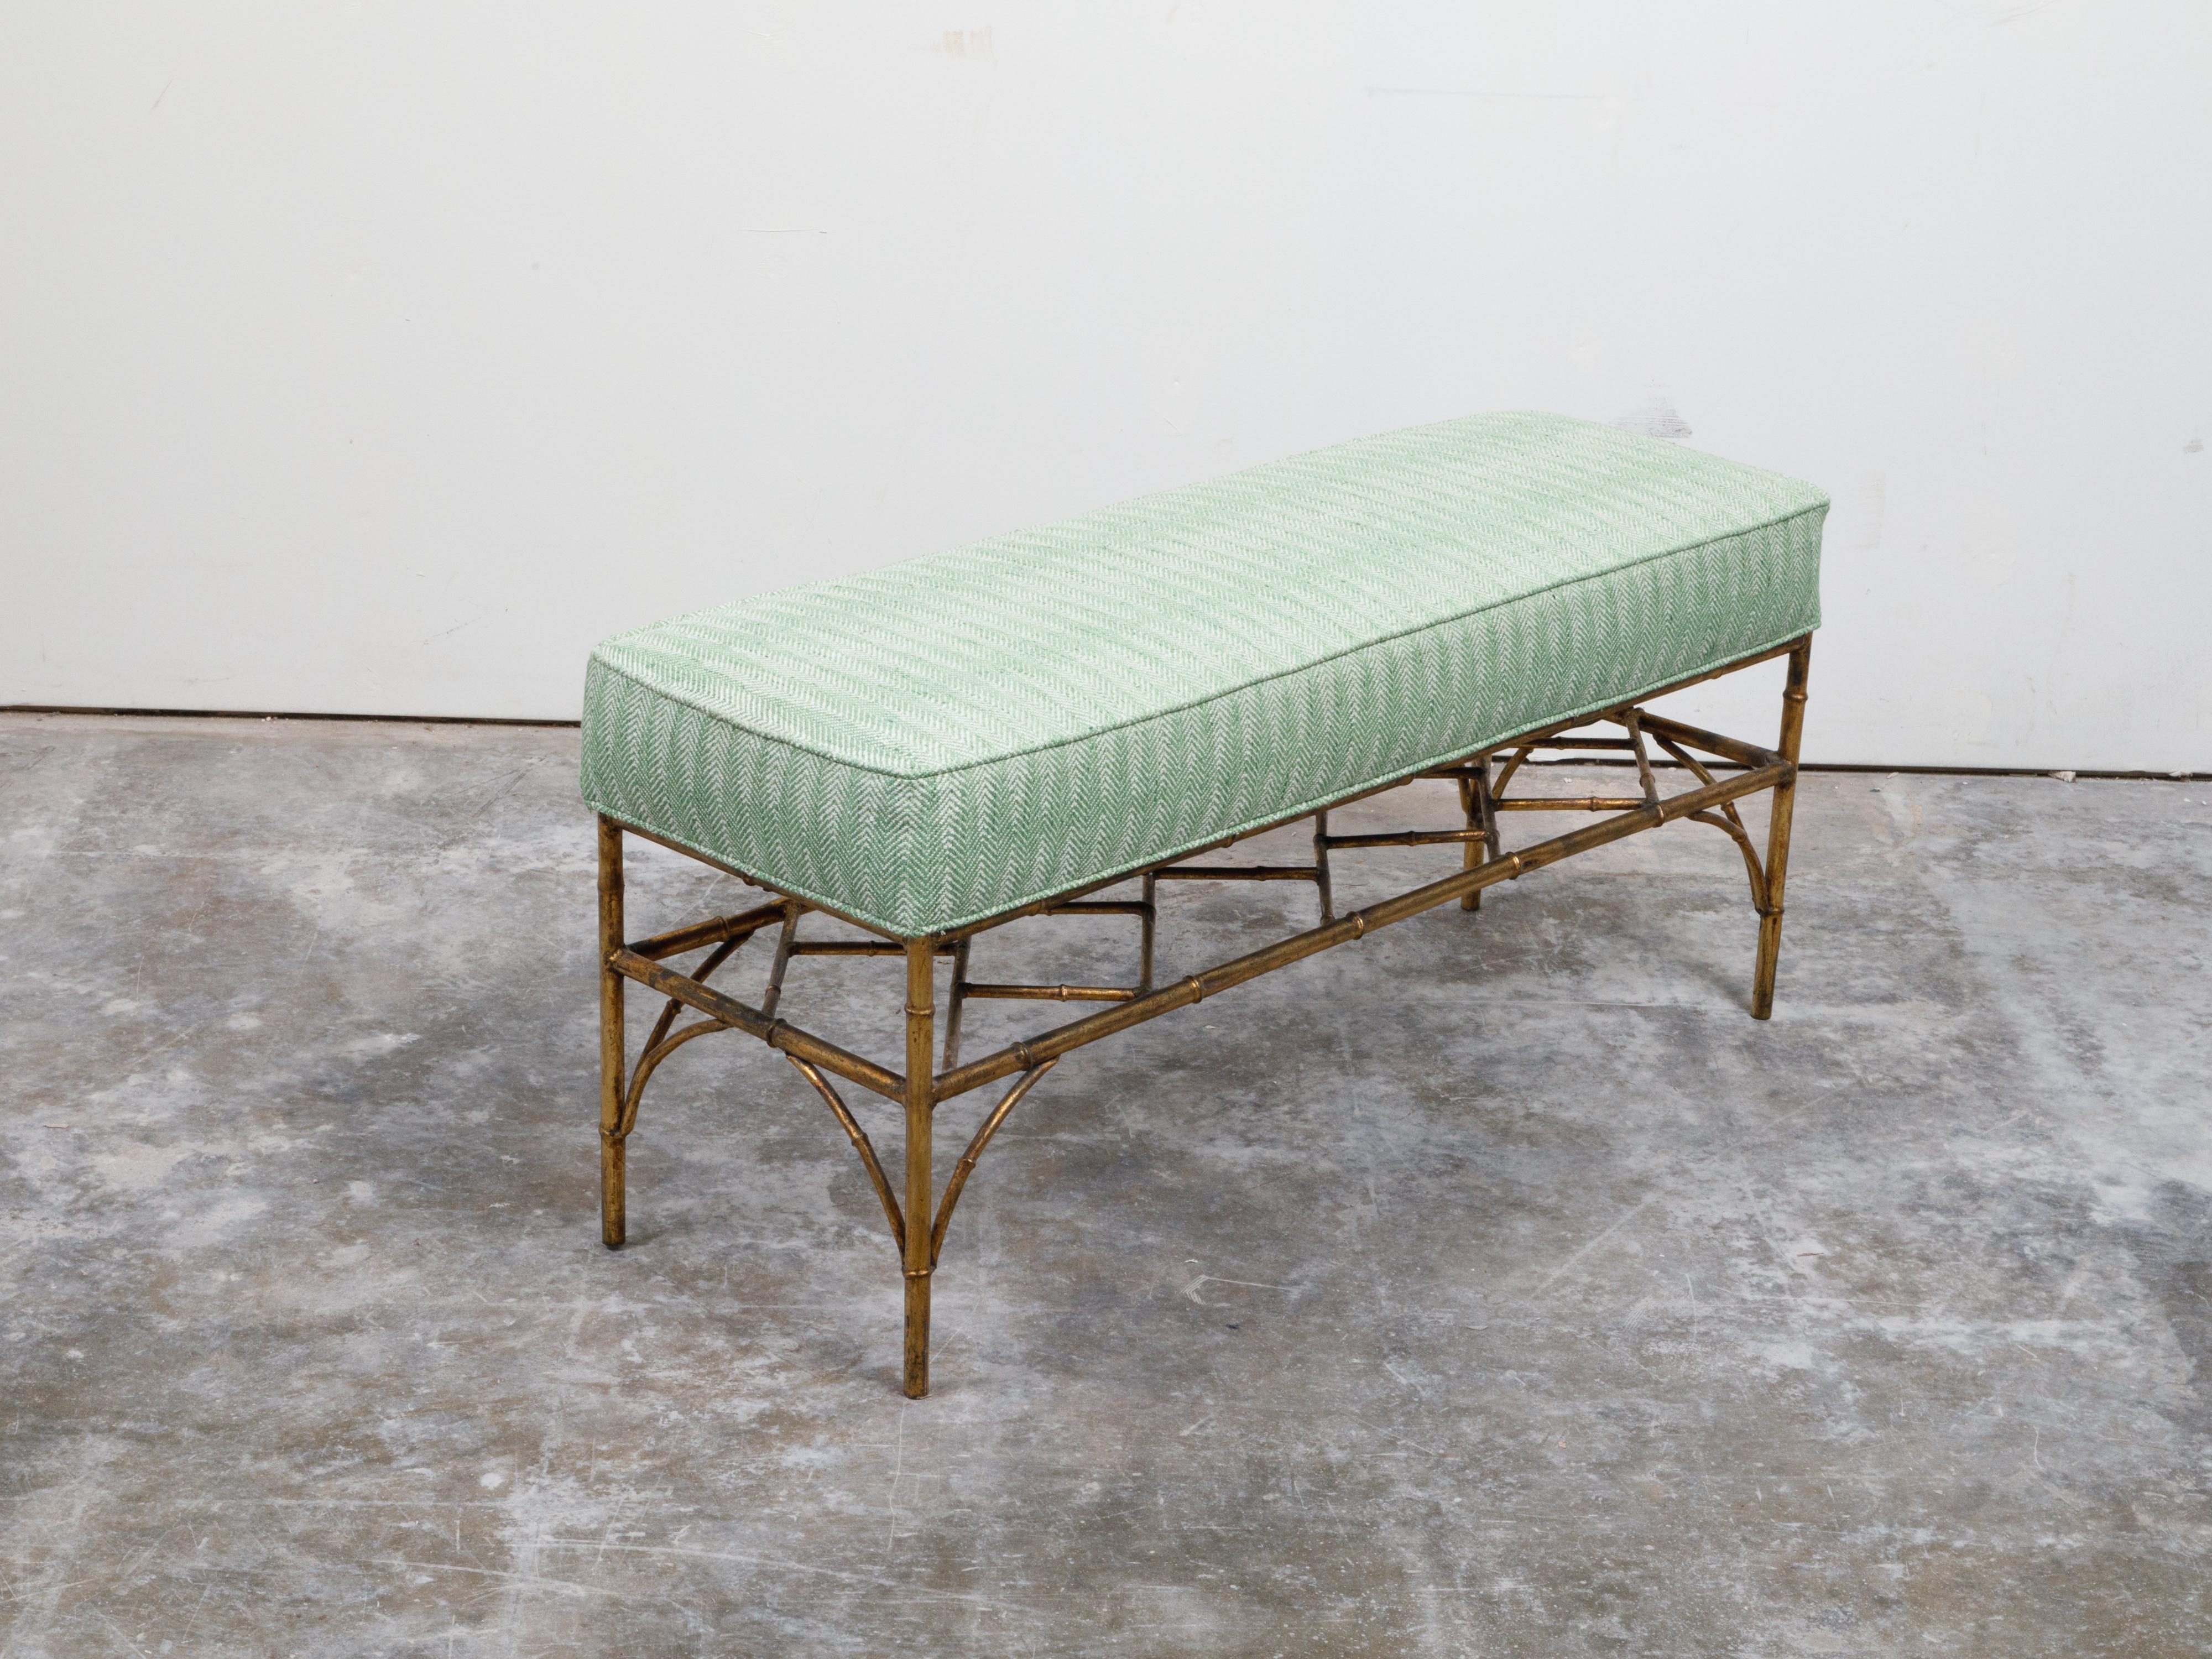 Italian Midcentury Gilt Metal Faux Bamboo Bench with Green Upholstered Seat For Sale 4